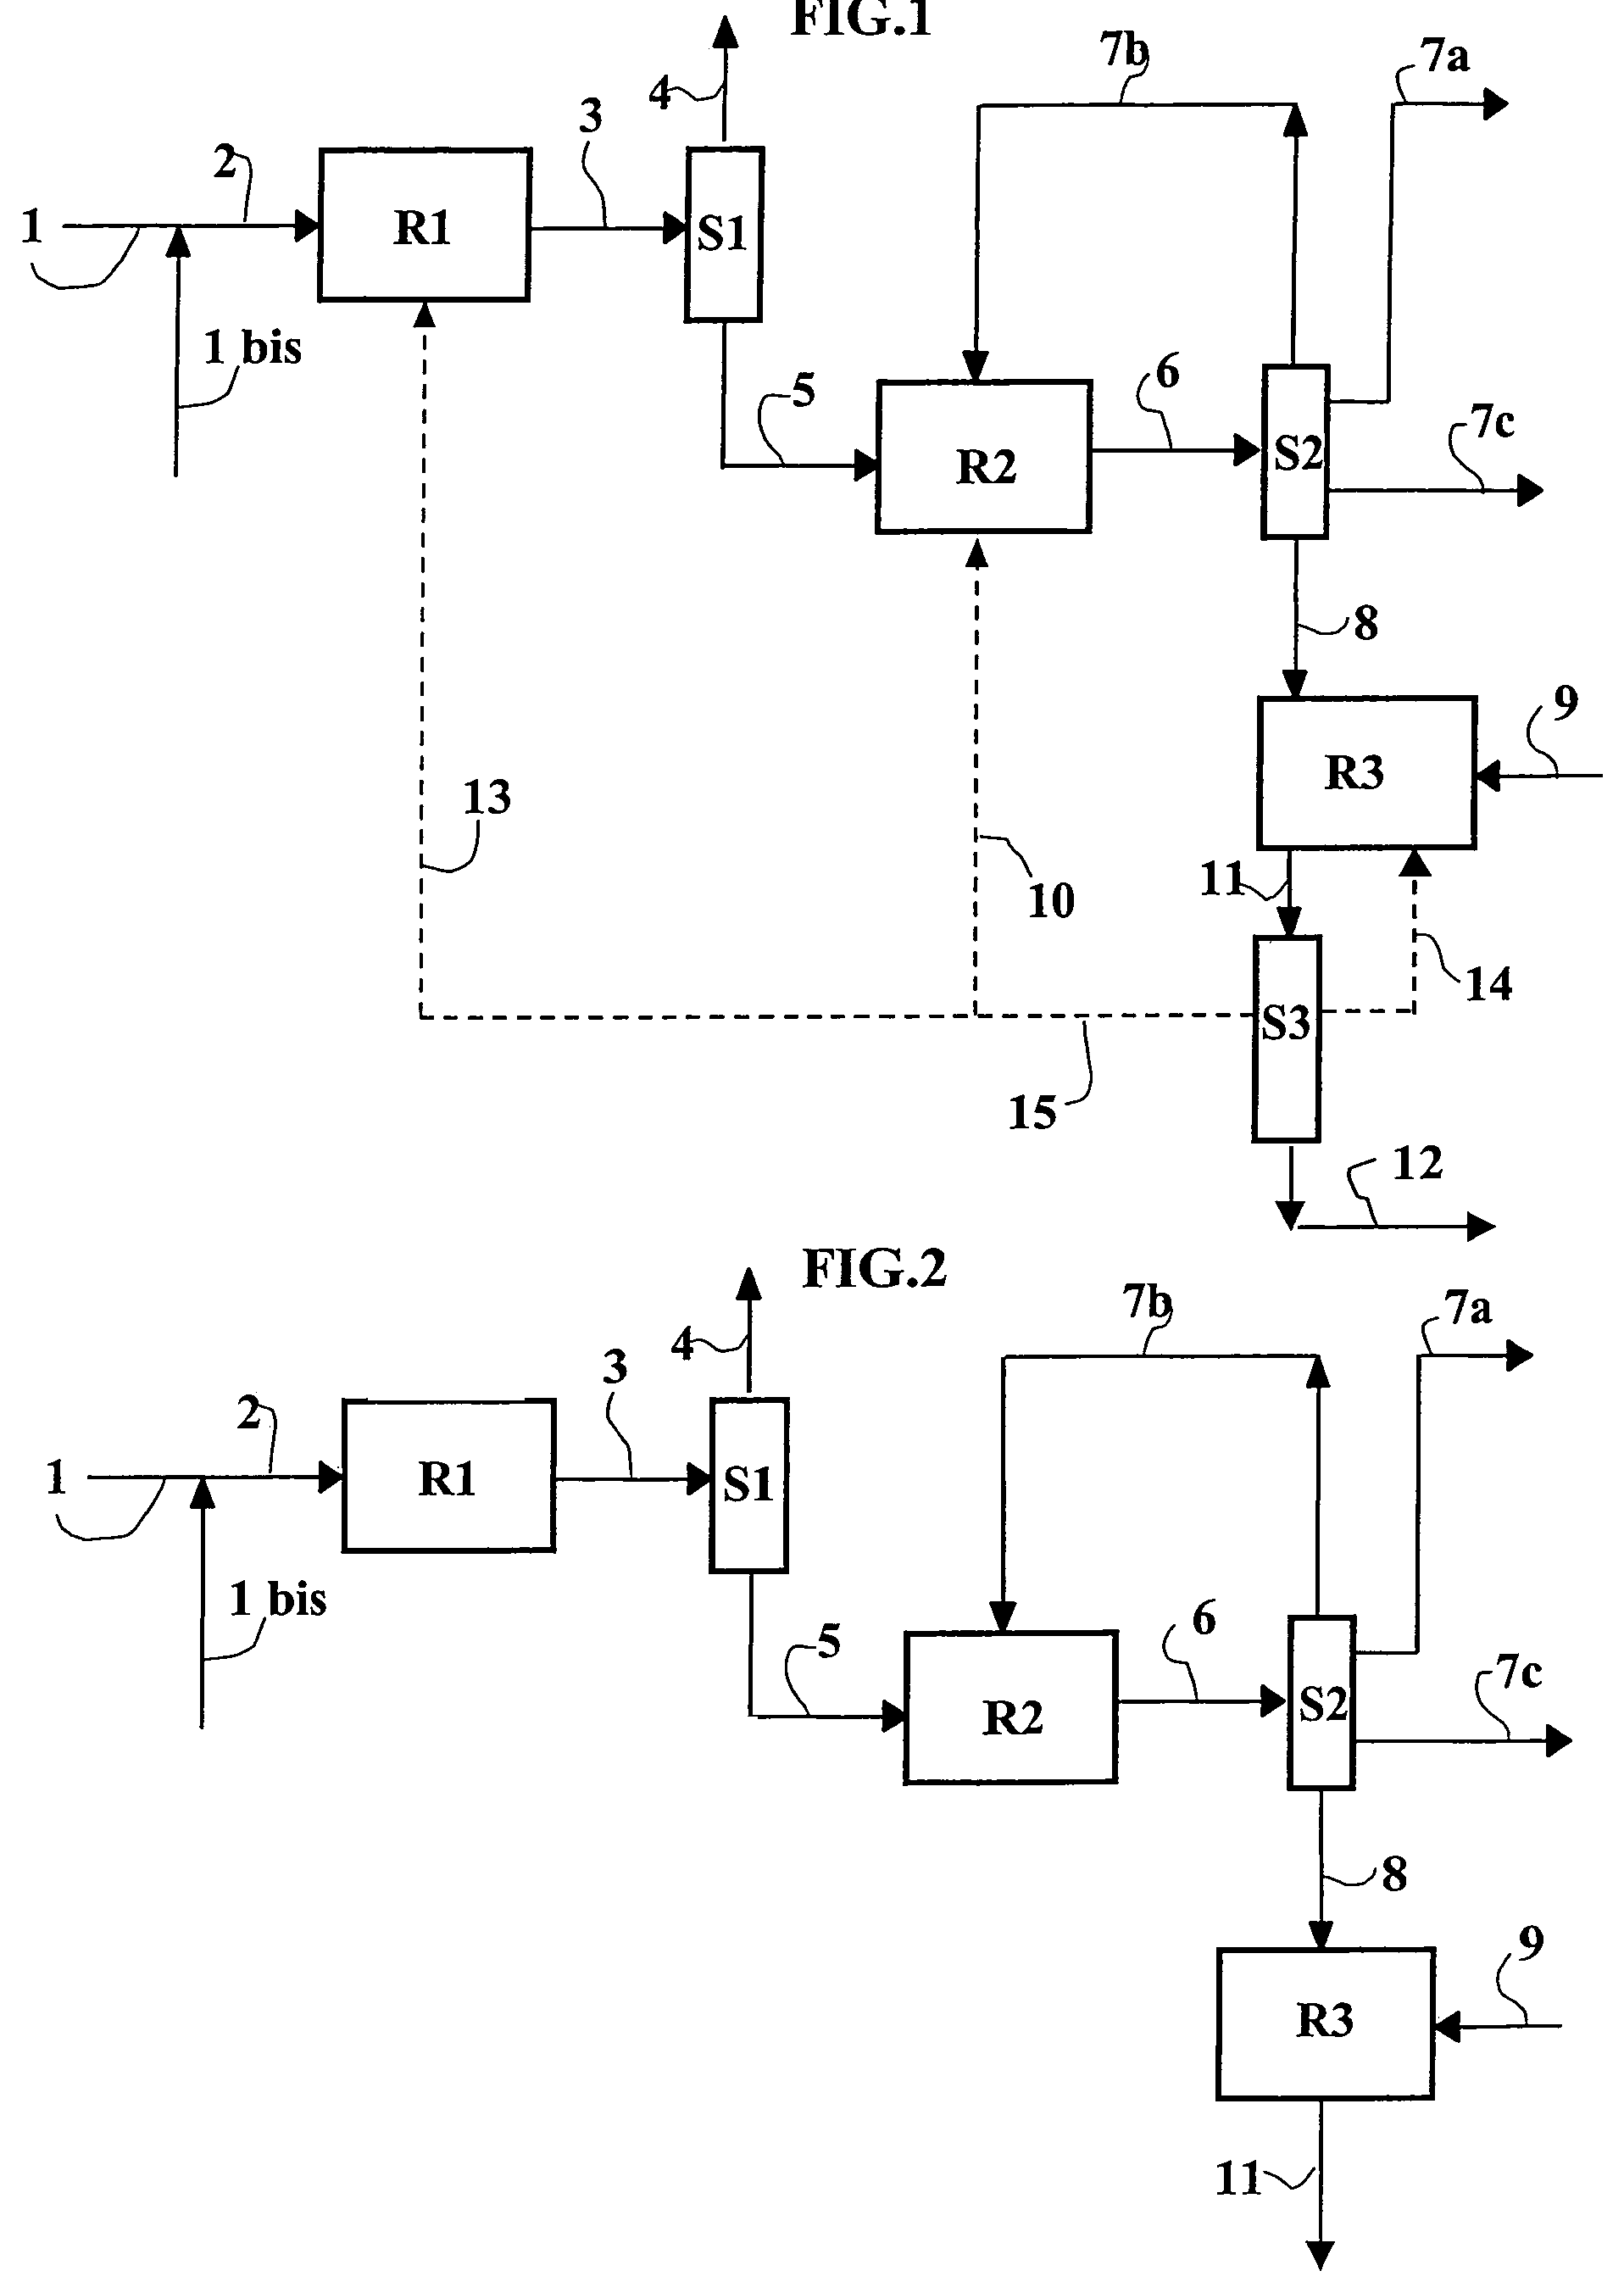 Method for jointly producing propylene and petrol from a relatively heavy charge